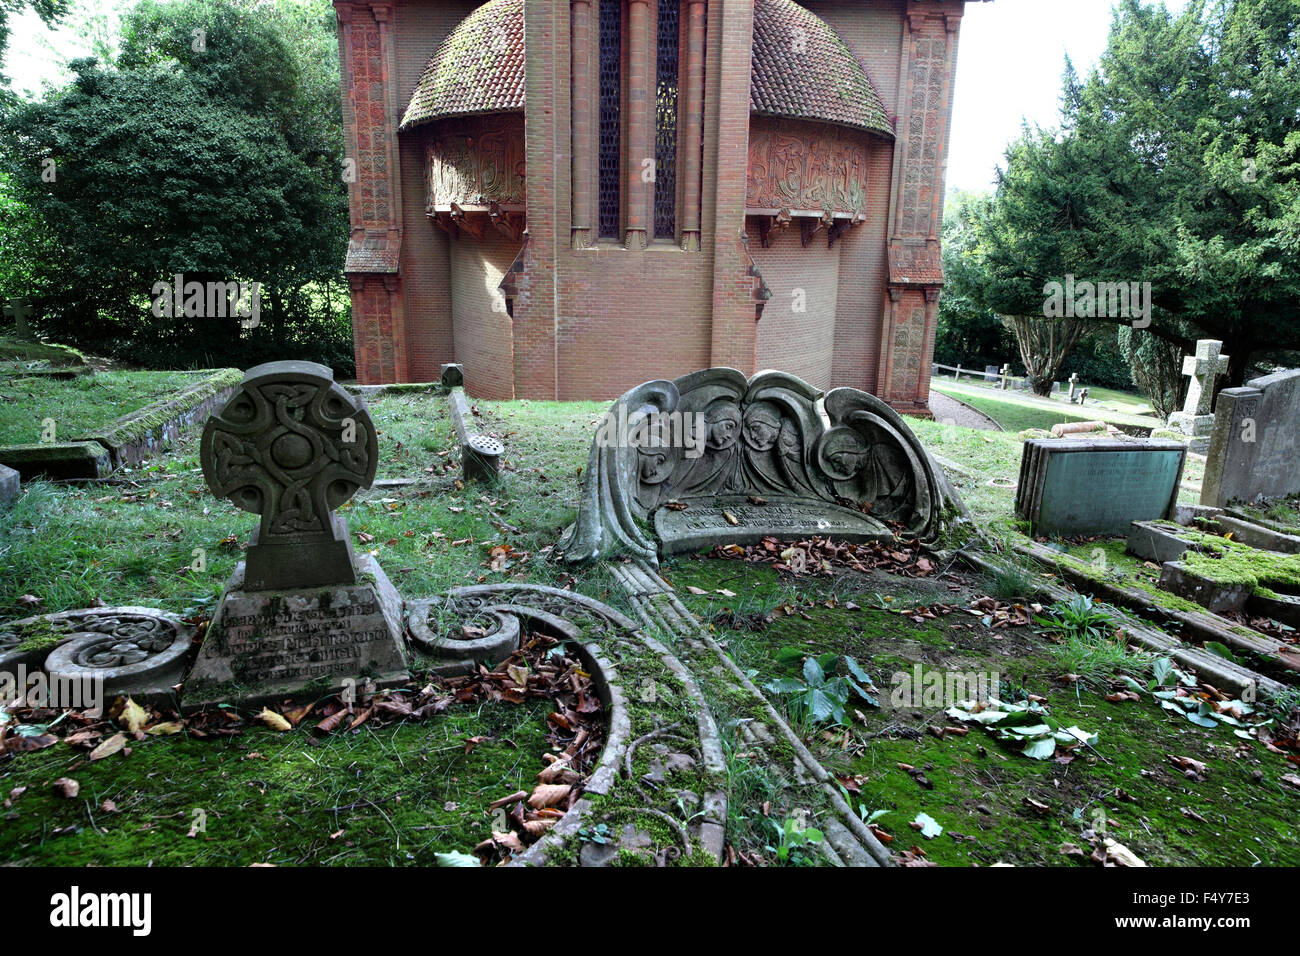 The Watts Chapel, Compton Surrey, with Art Nouveau gravestones in the foreground. Stock Photo